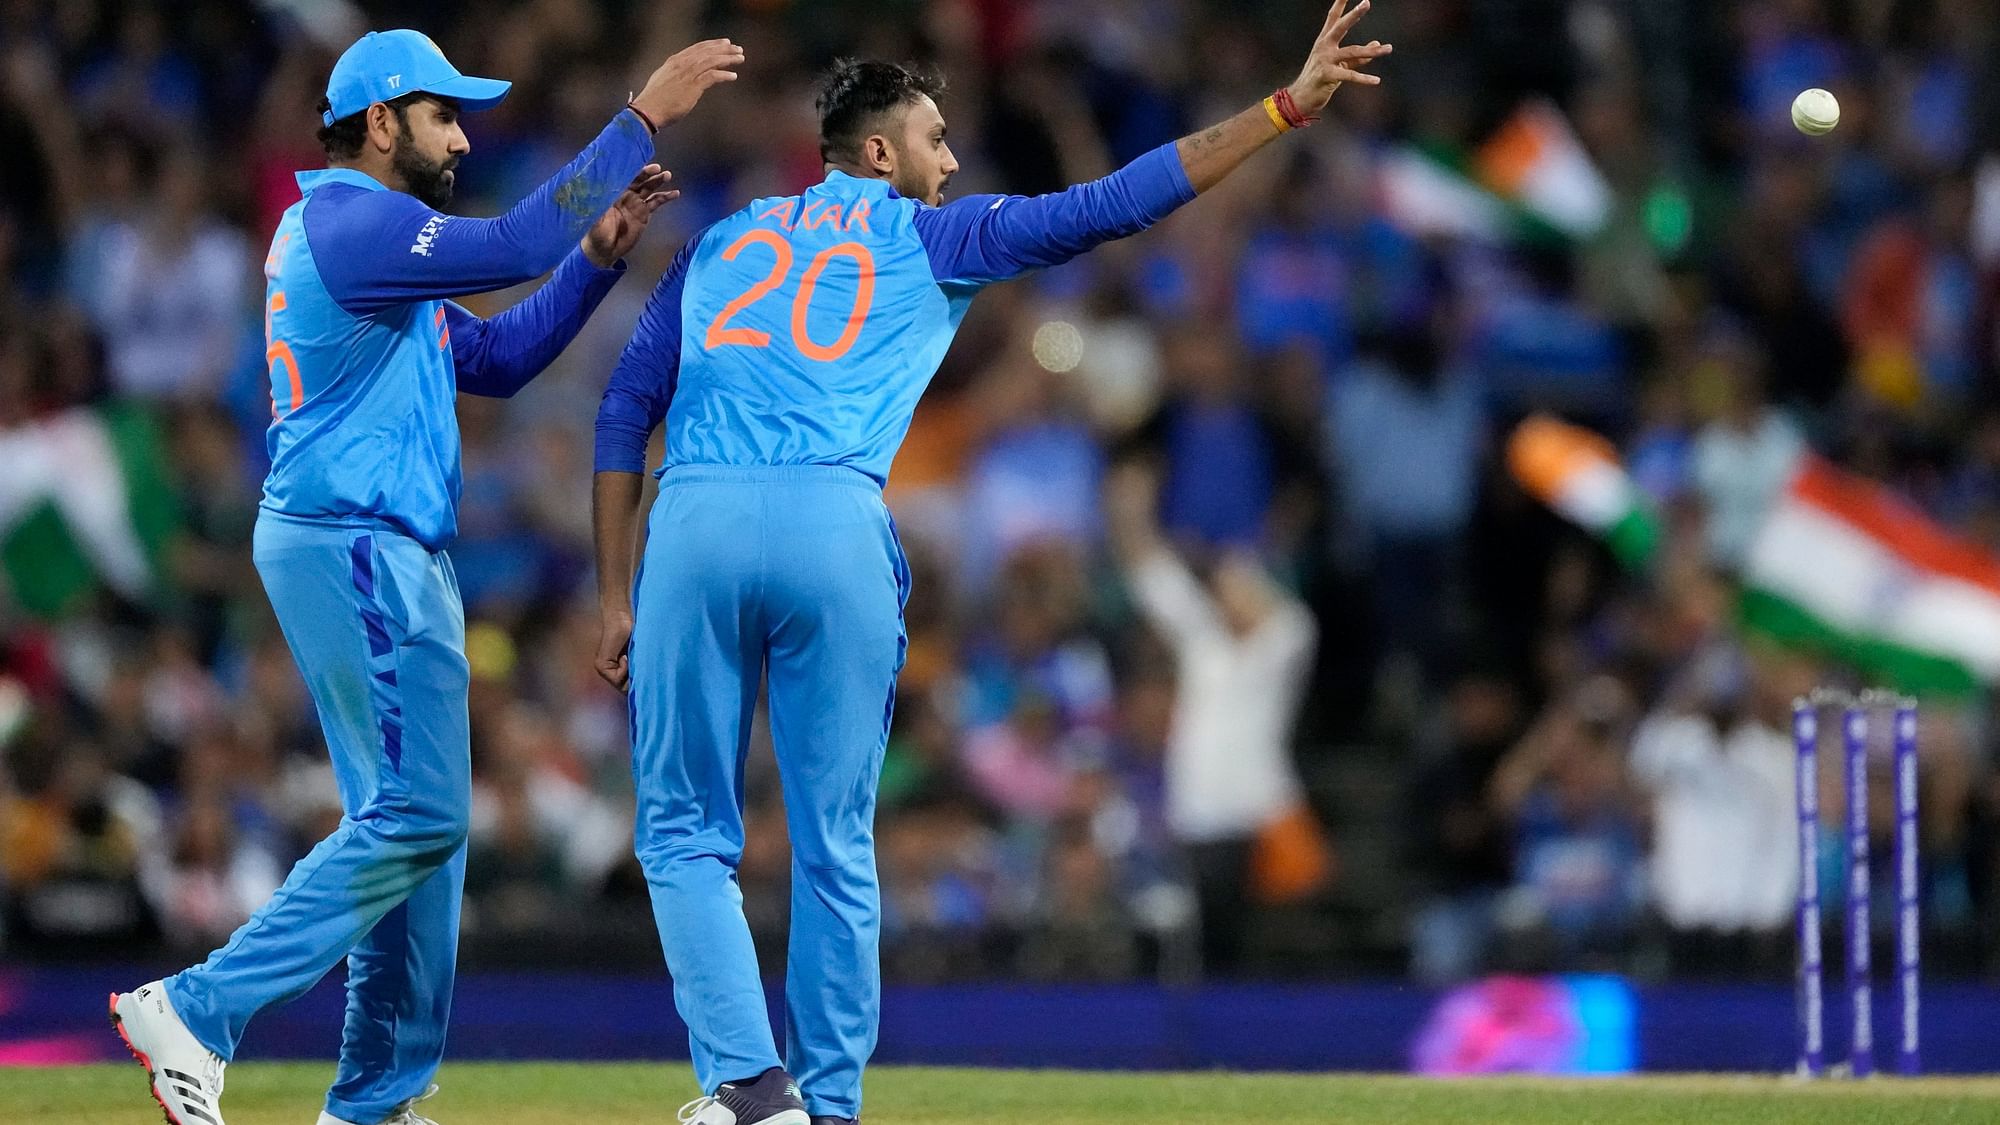 India vs Netherlands Highlights, IND vs NED Cricket Score, T20 World Cup Match Latest Updates India Beat Netherlands By 56 Runs